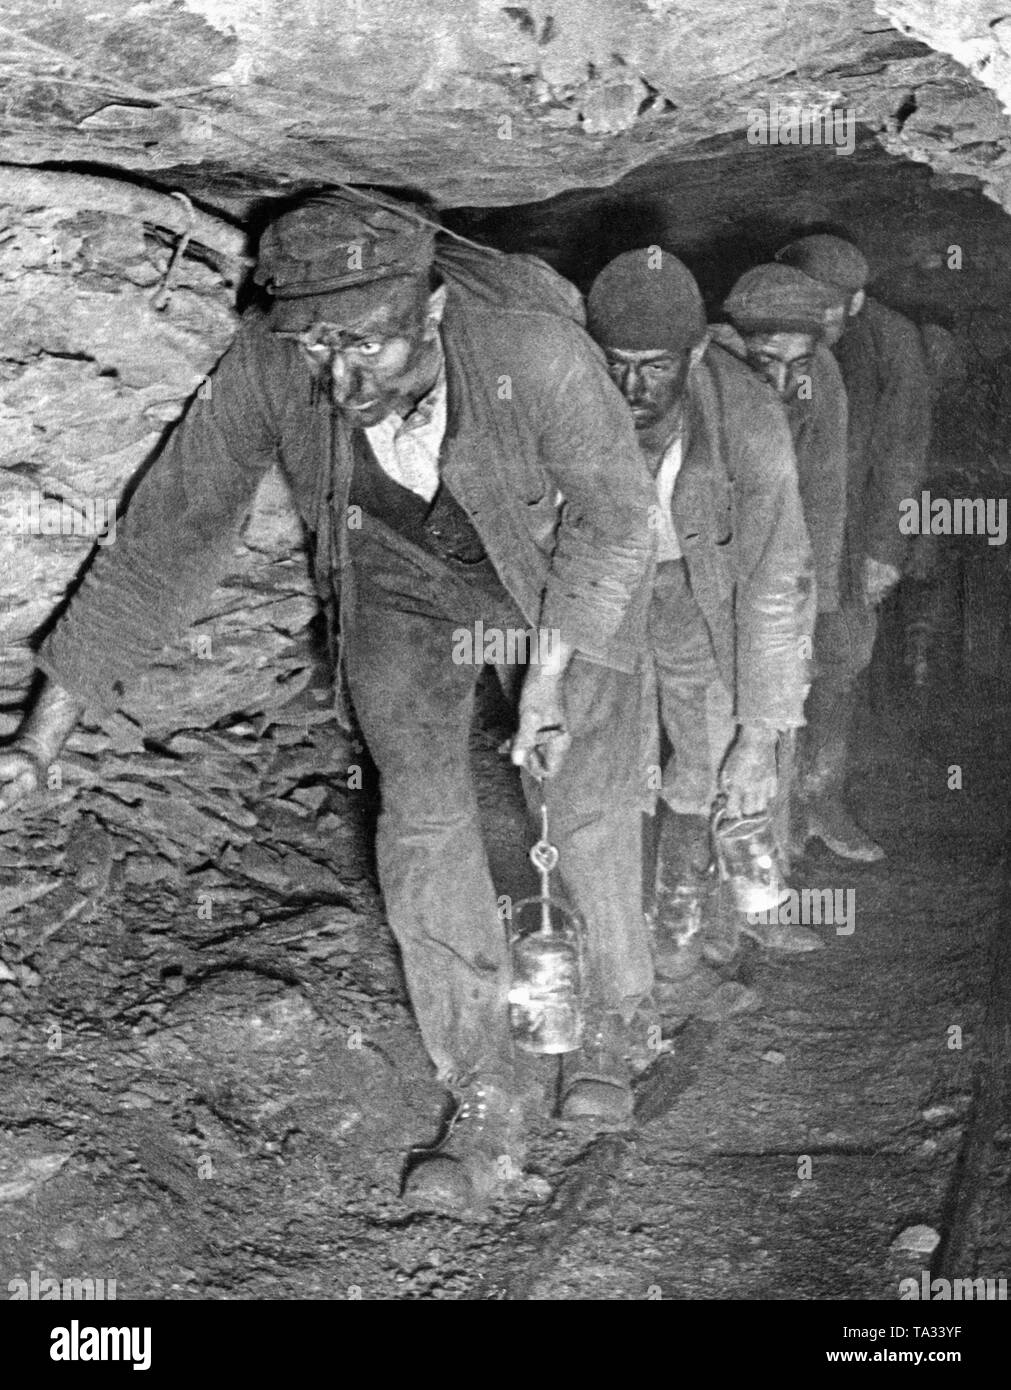 Miners in a low tunnel in Saarland on the way back from work. Their faces are blackened by coal dust. They carry mine lights. Stock Photo